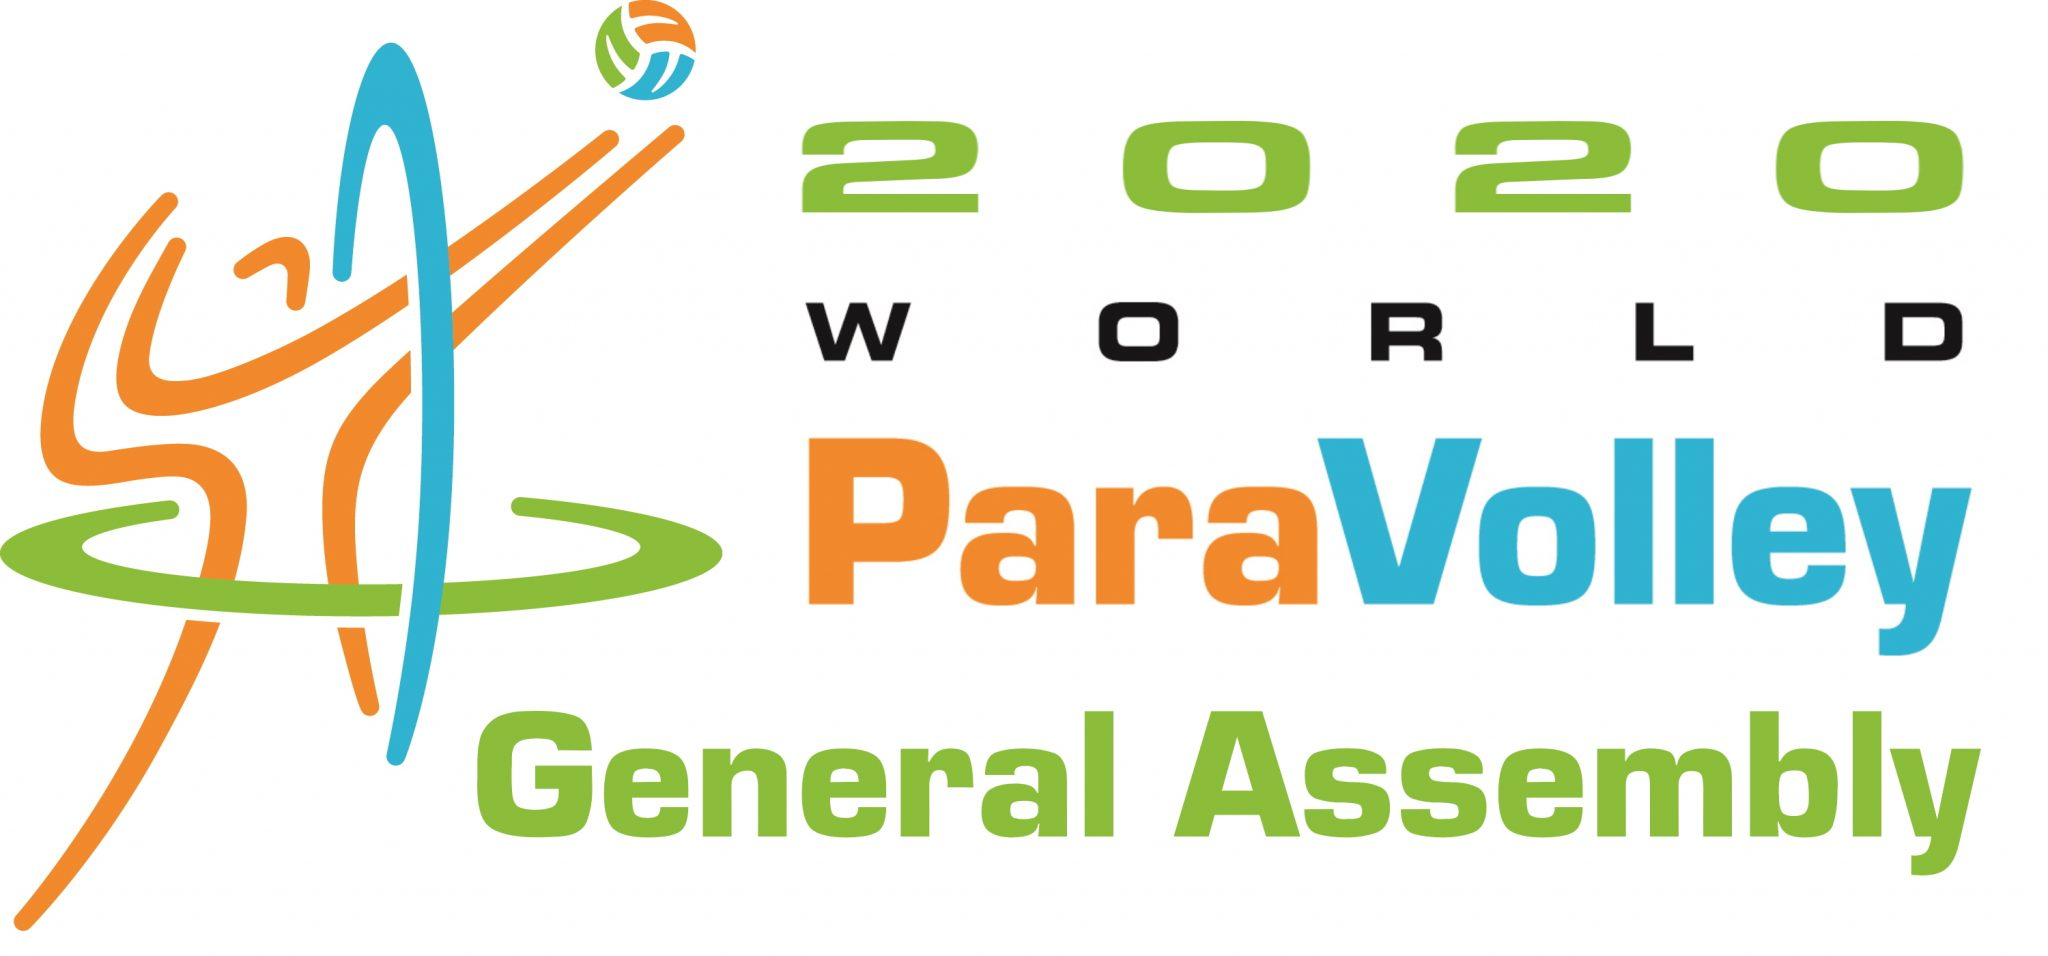 World ParaVolley could hold its General Assembly online ©World ParaVolley